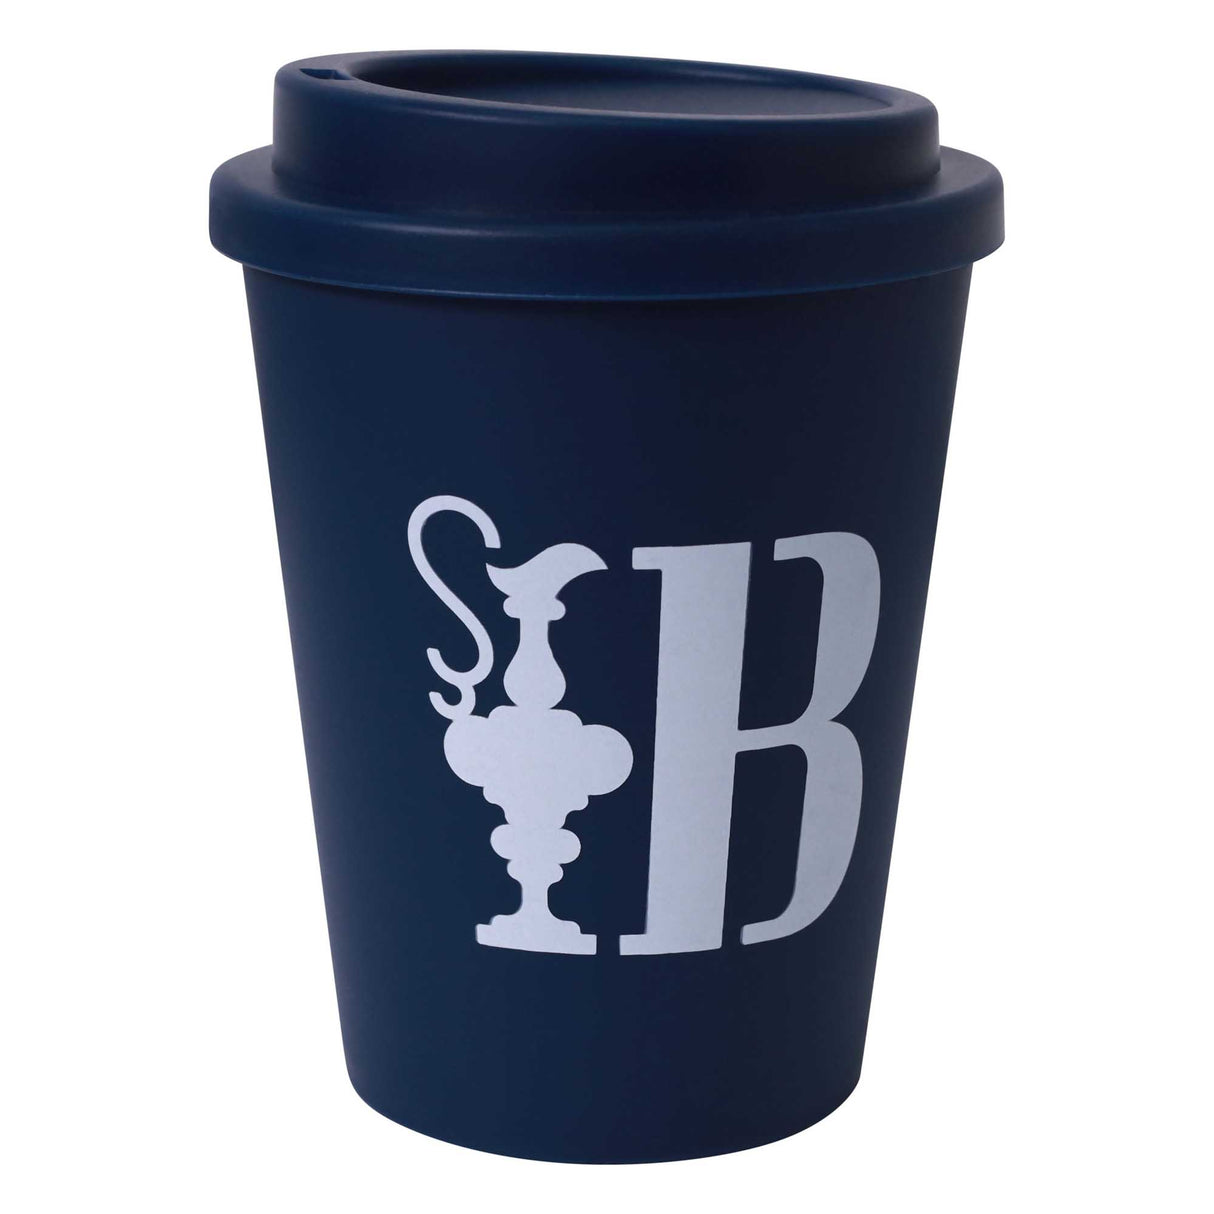 37th America’s Cup Coffee Cup